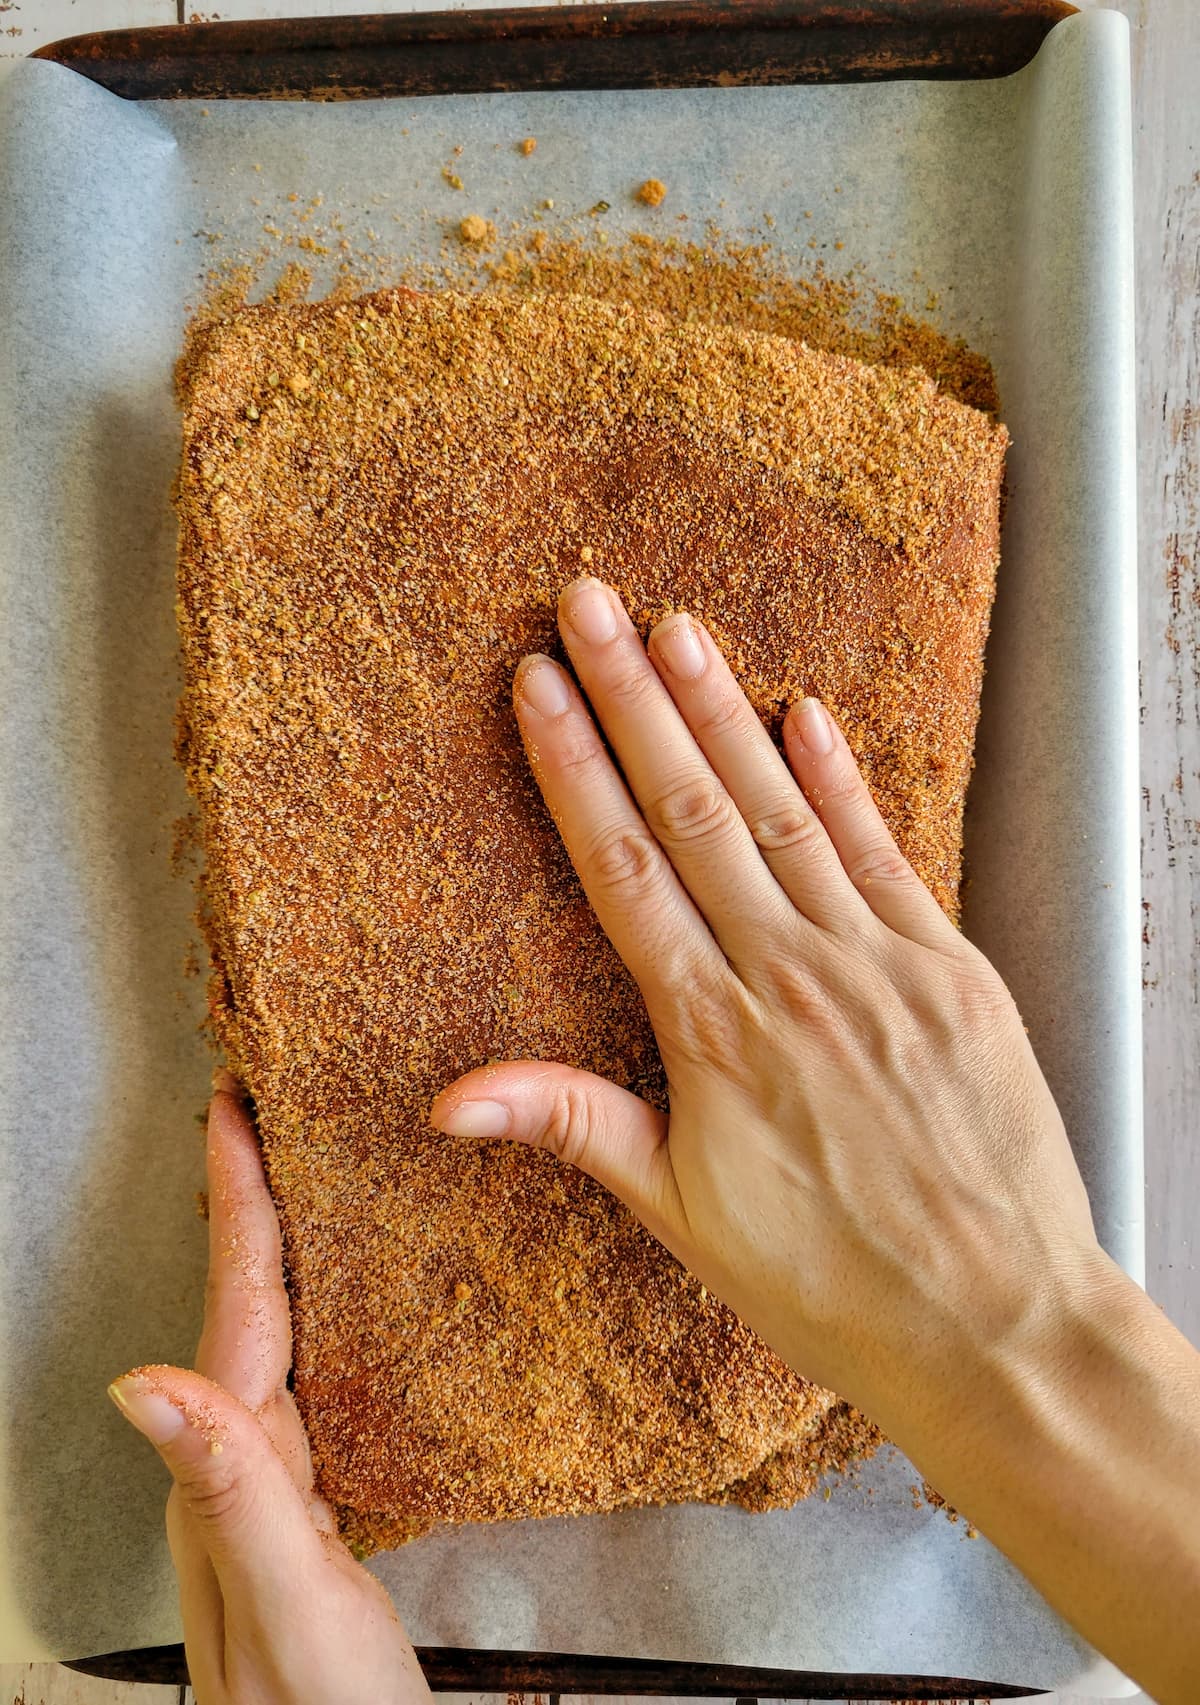 hand rubbing dry rub onto a whole raw brisket on a parchment lined baking sheet